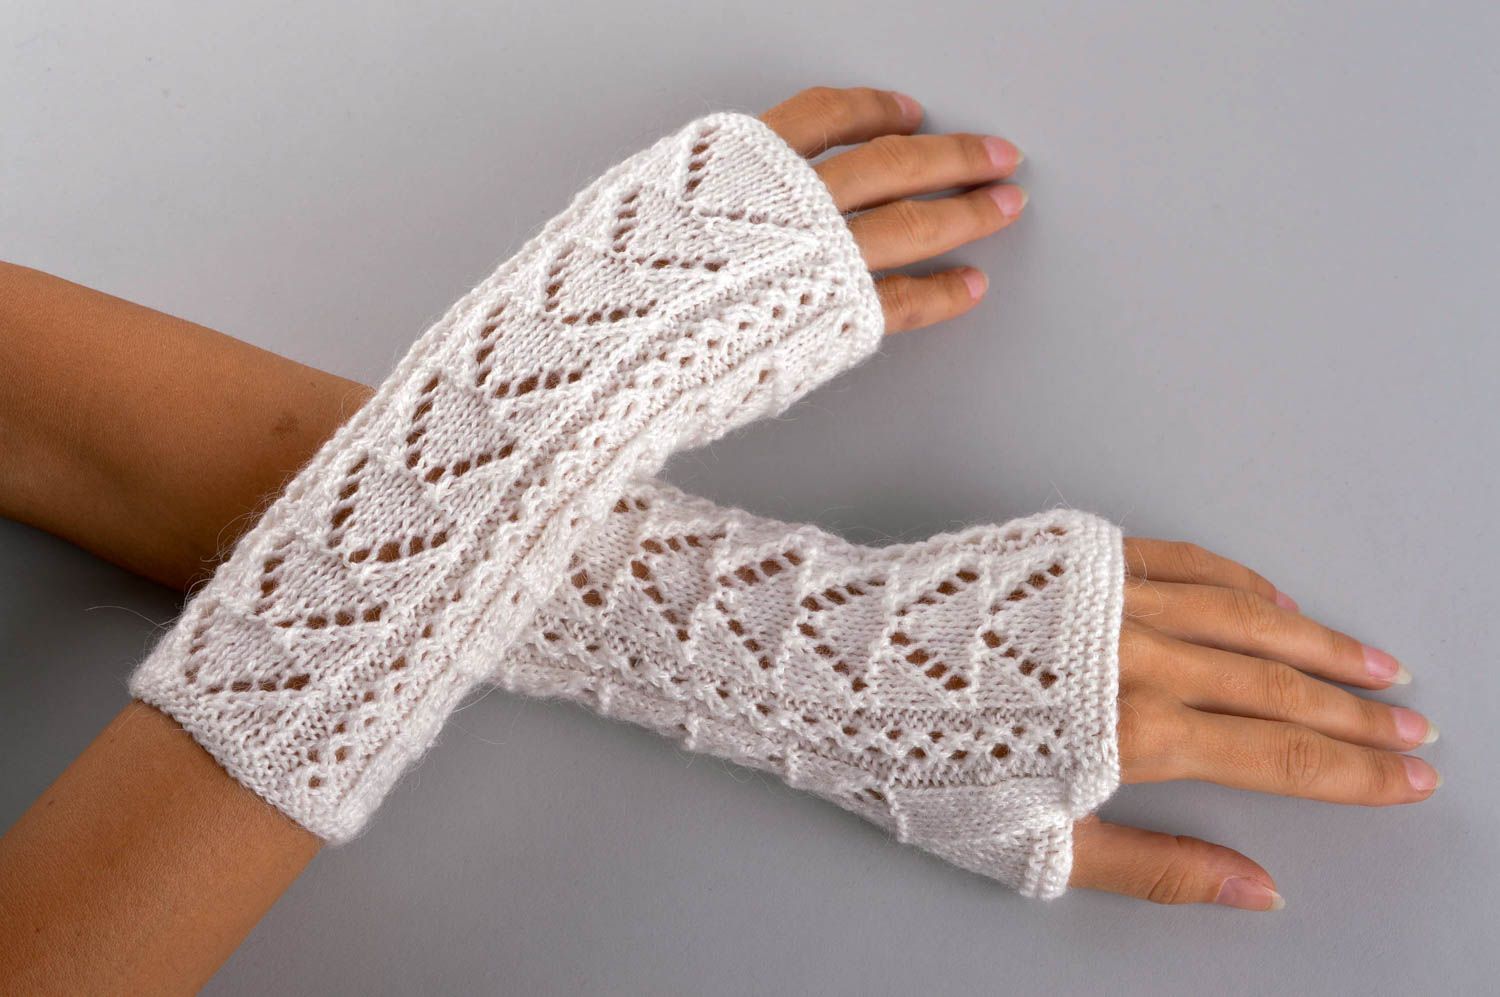 Unusual handmade crochet mittens fashion accessories warm mittens gifts for her photo 1